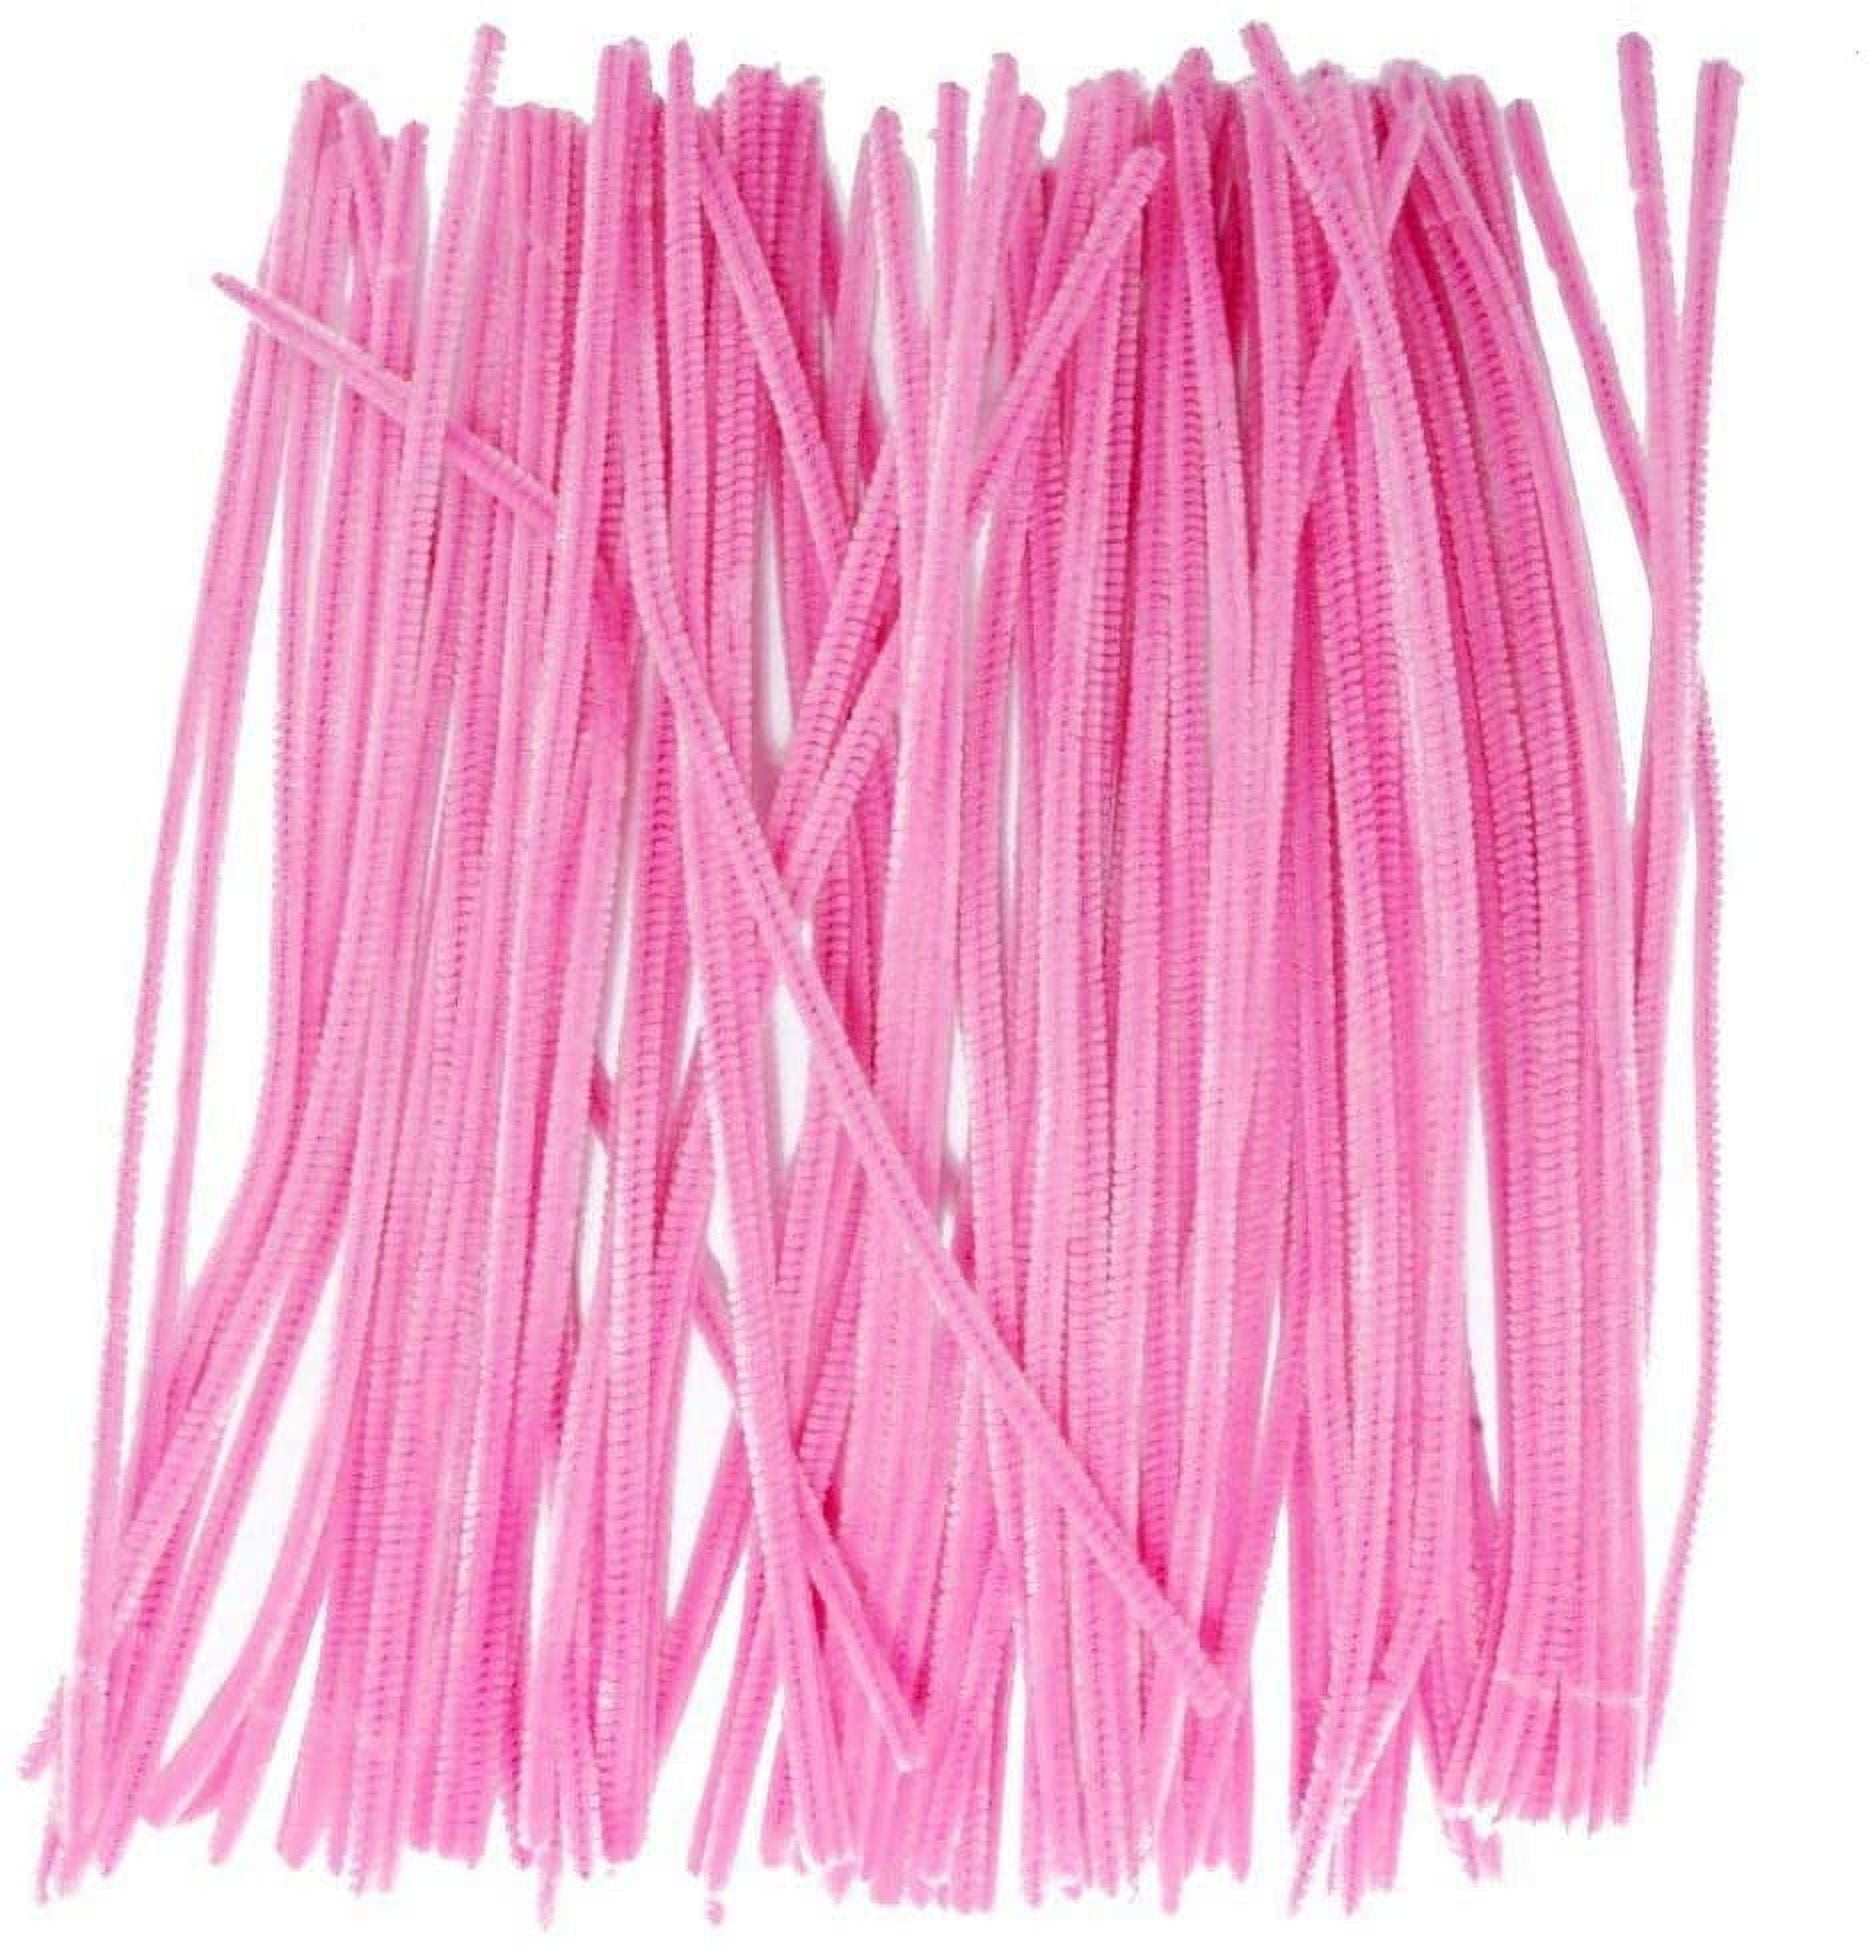 Saim Fuzzy Sticks, Pink Pipe Cleaners Chenille Stems 12 for Creative  Handmade Arts and Crafts, 100pcs 